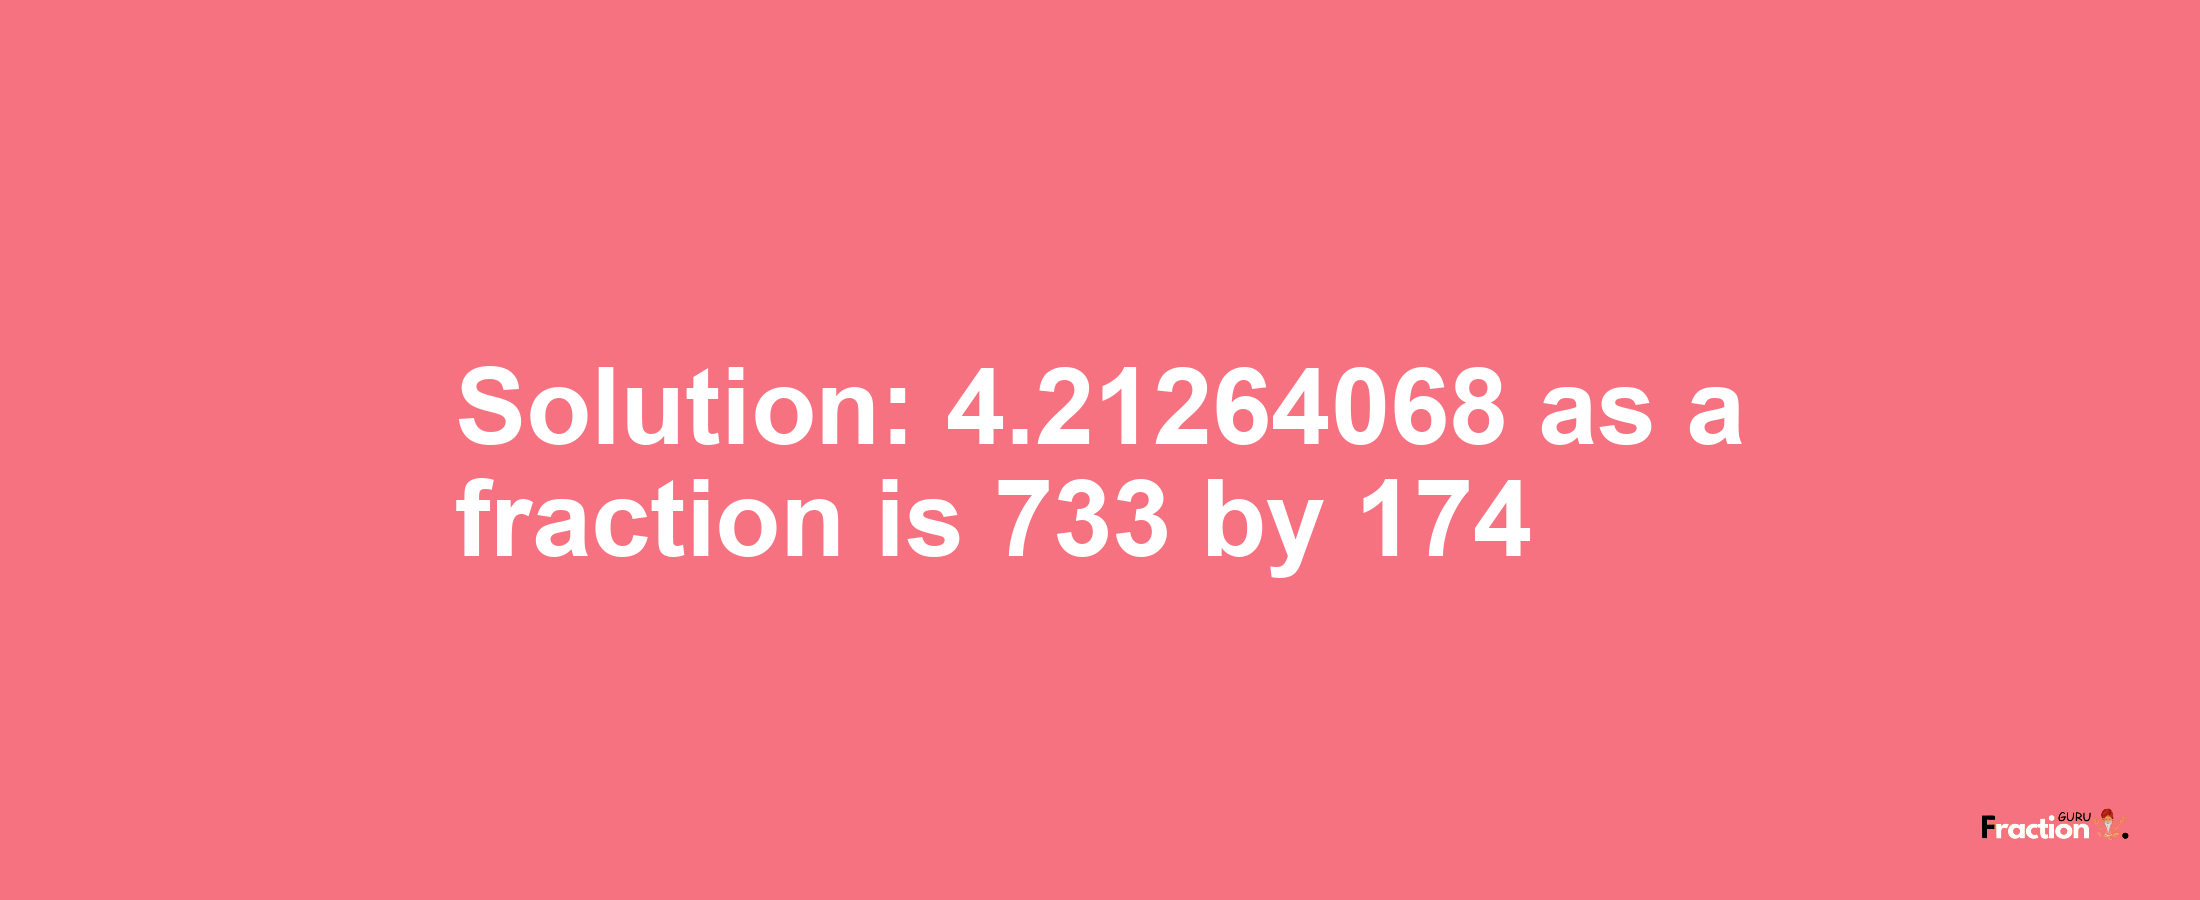 Solution:4.21264068 as a fraction is 733/174